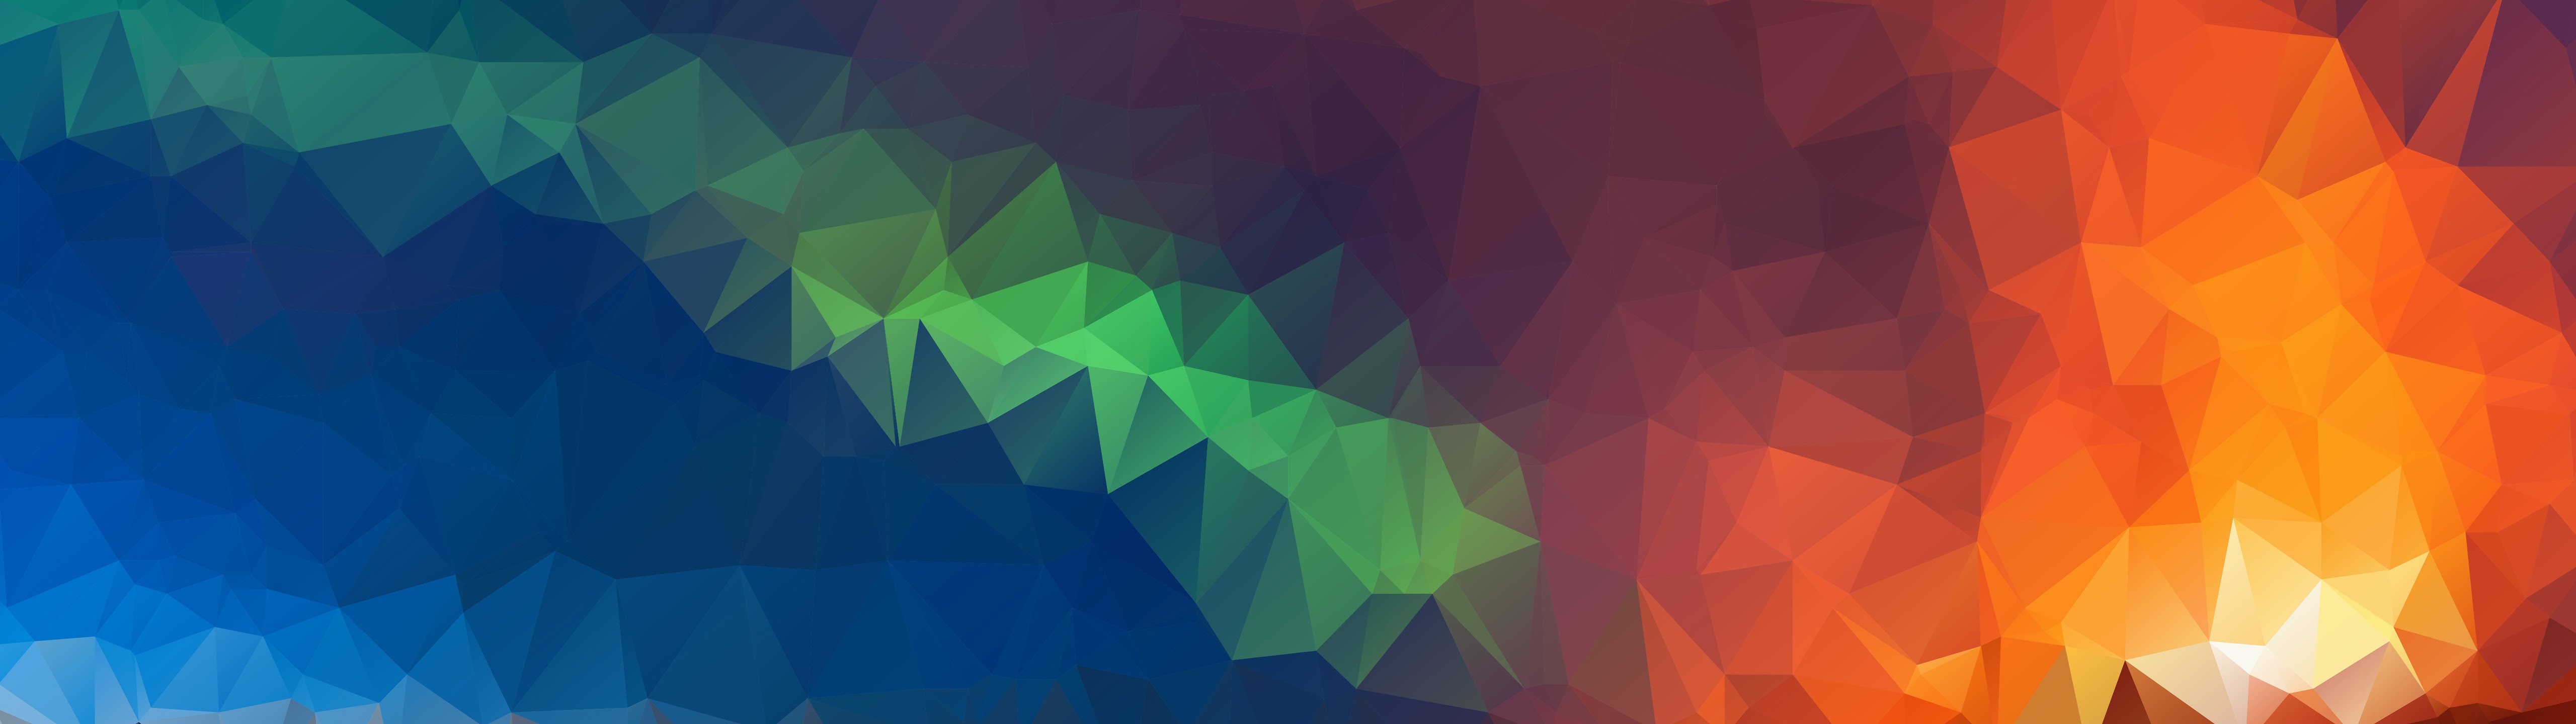 Abstract, Colorful, Polygon, 8k, 7680x4320, - 5120 X 1440 Wallpaper Abstract - HD Wallpaper 